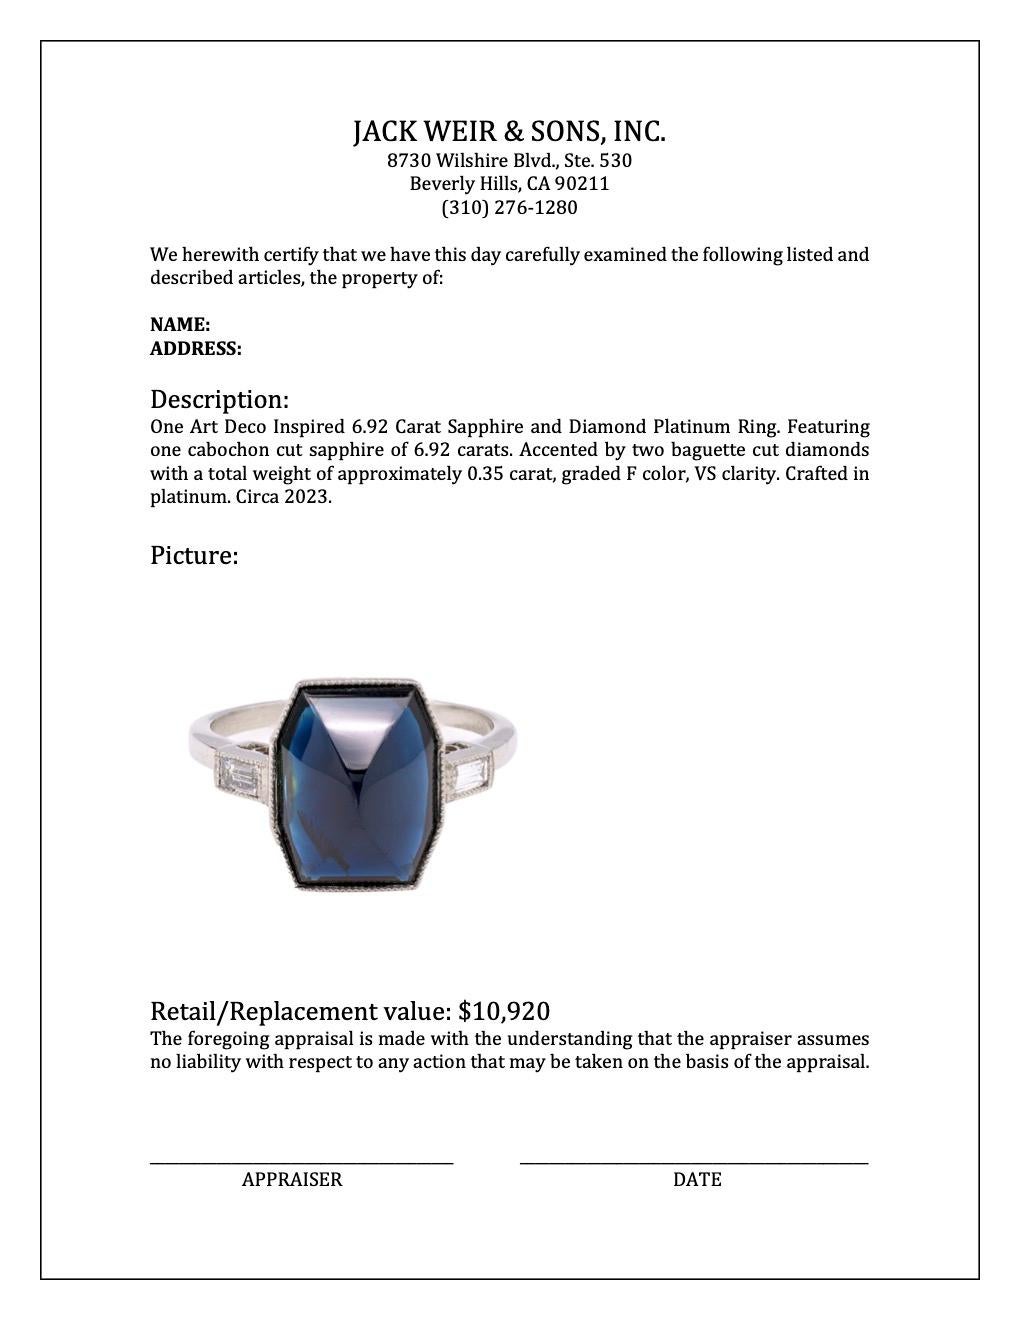 Art Deco Inspired 6.92 Carat Sapphire and Diamond Platinum Ring For Sale 2